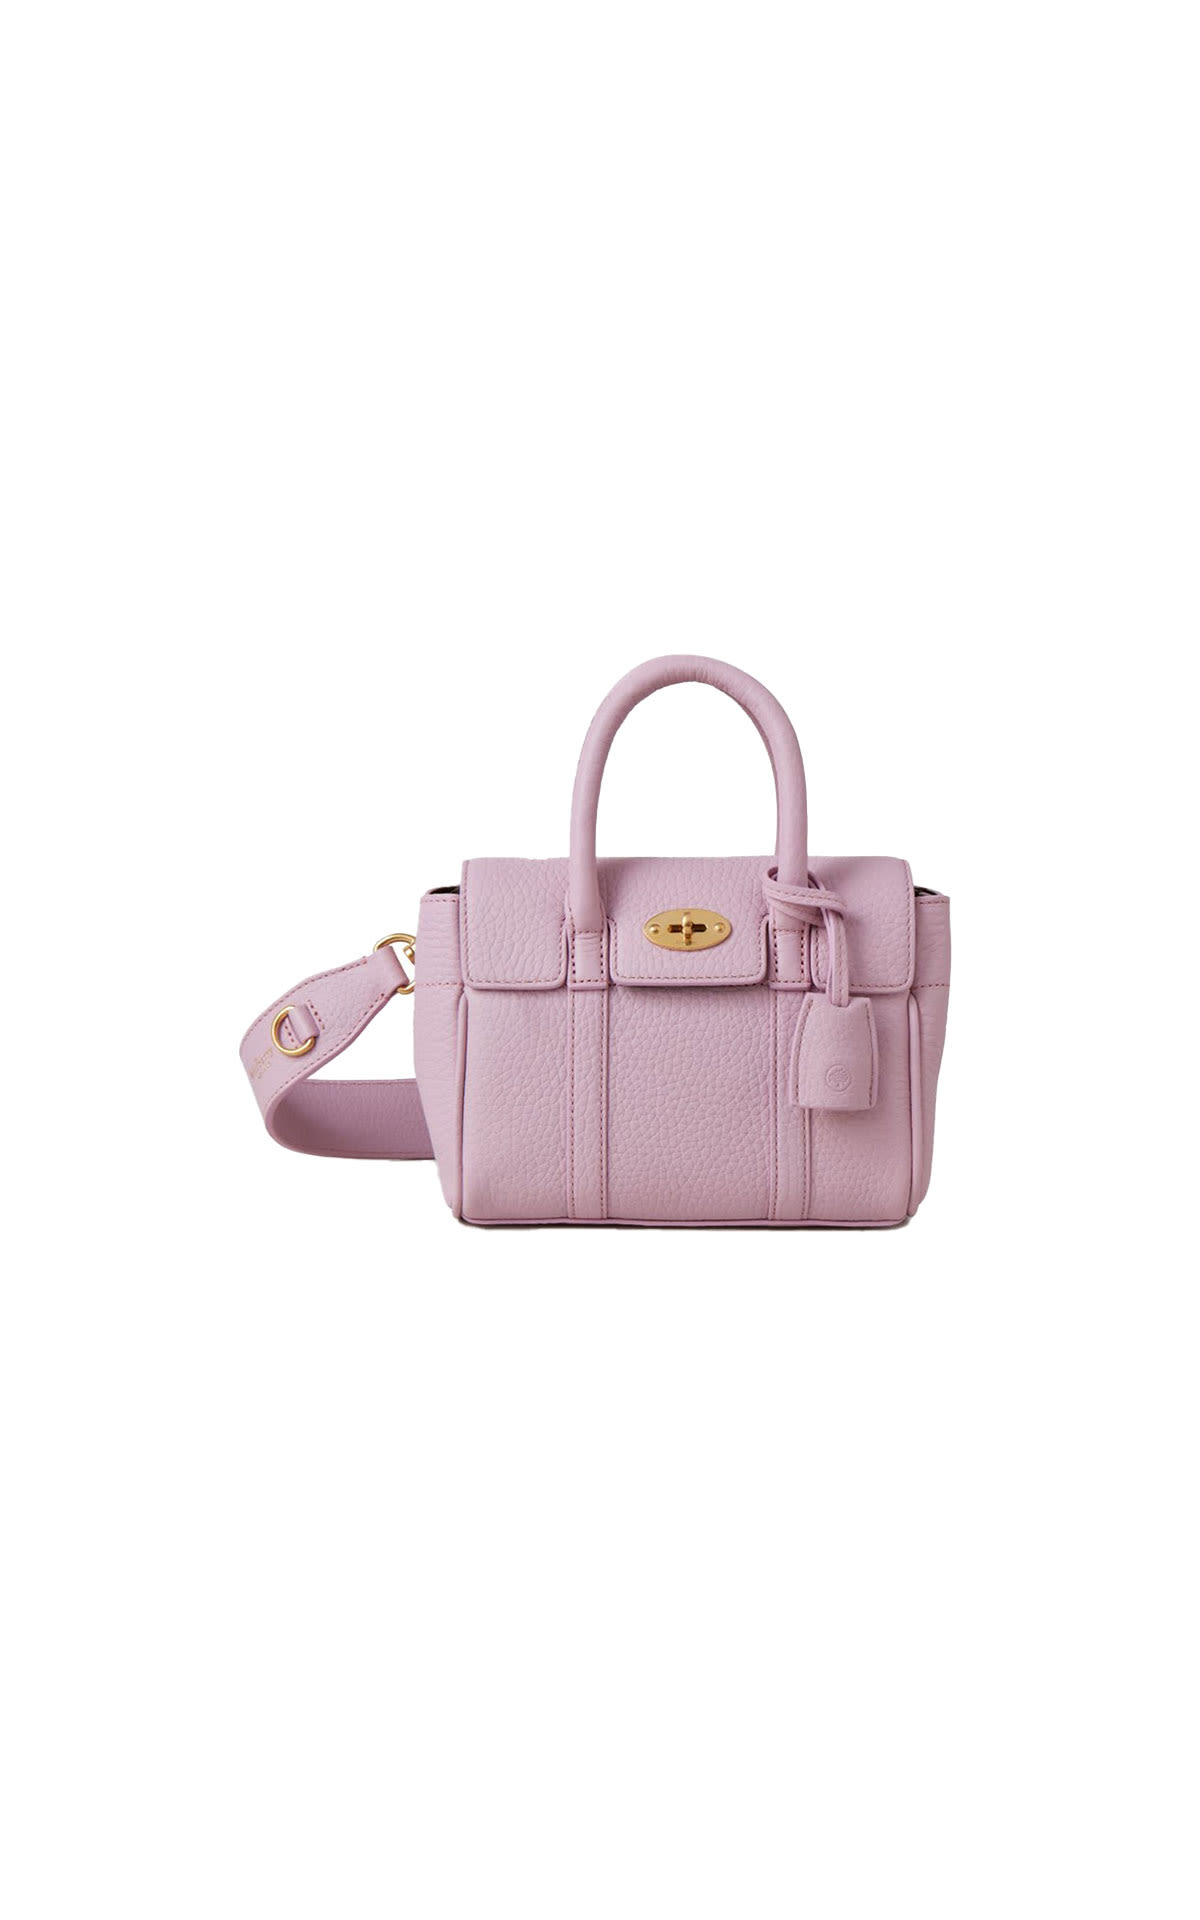 Mulberry Mini baywater bag from Bicester Village